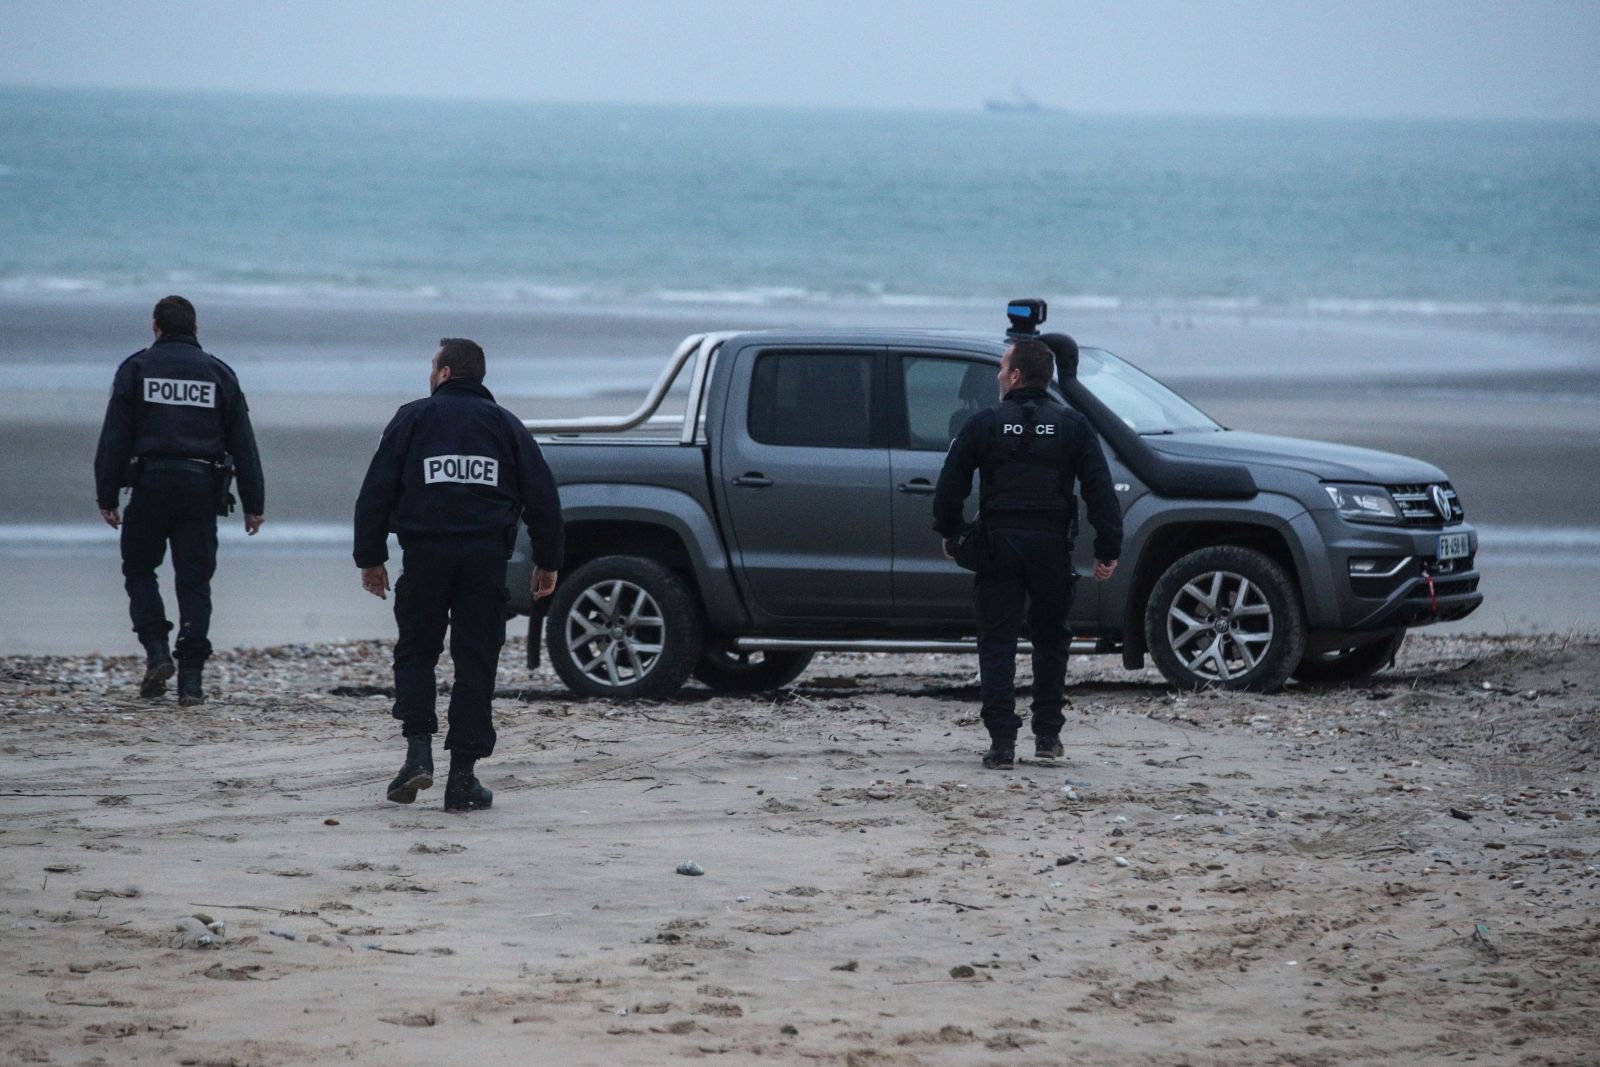 epa09602233 Policemen inspect the beach near Wimereux, France, 25 November 2021. At least 27 migrants have died and two others have been taken to hospital after a boat in which they were trying to cross the La Manche canal (English Channel) to Great Britain sank on 24 November.  EPA/MOHAMMED BADRA